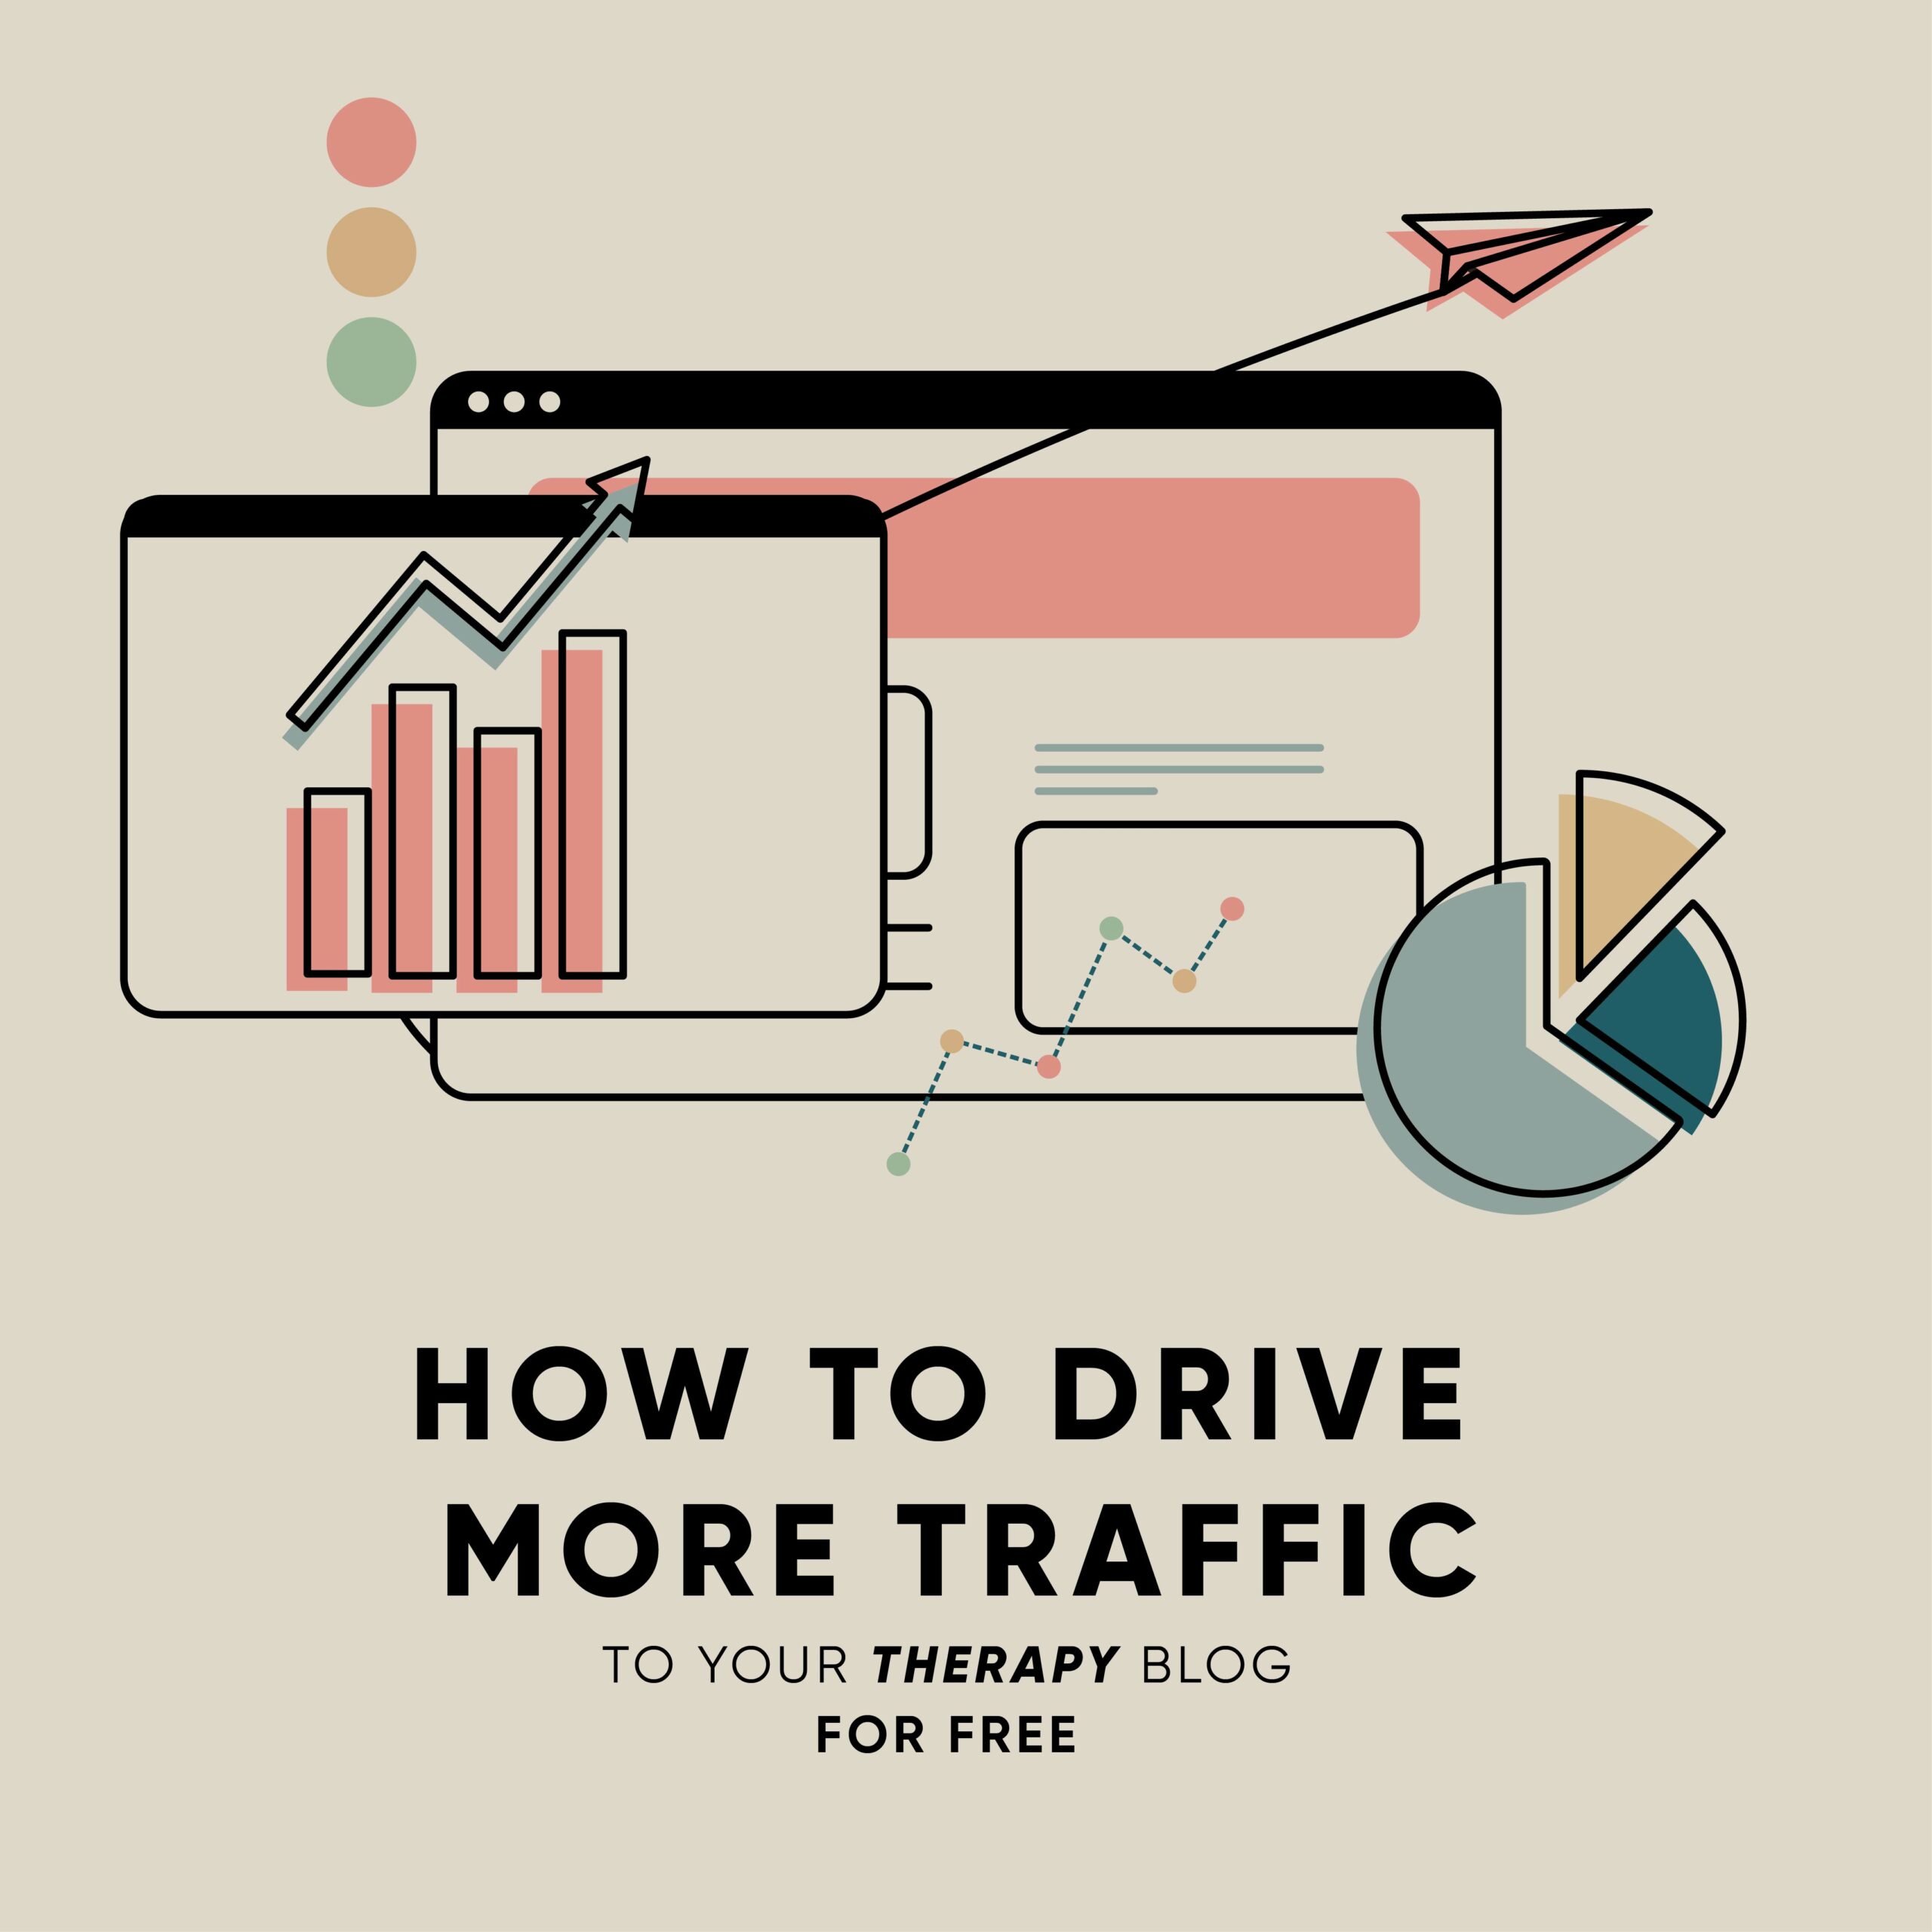 How to Drive More Traffic to Your Therapy Blog for FREE